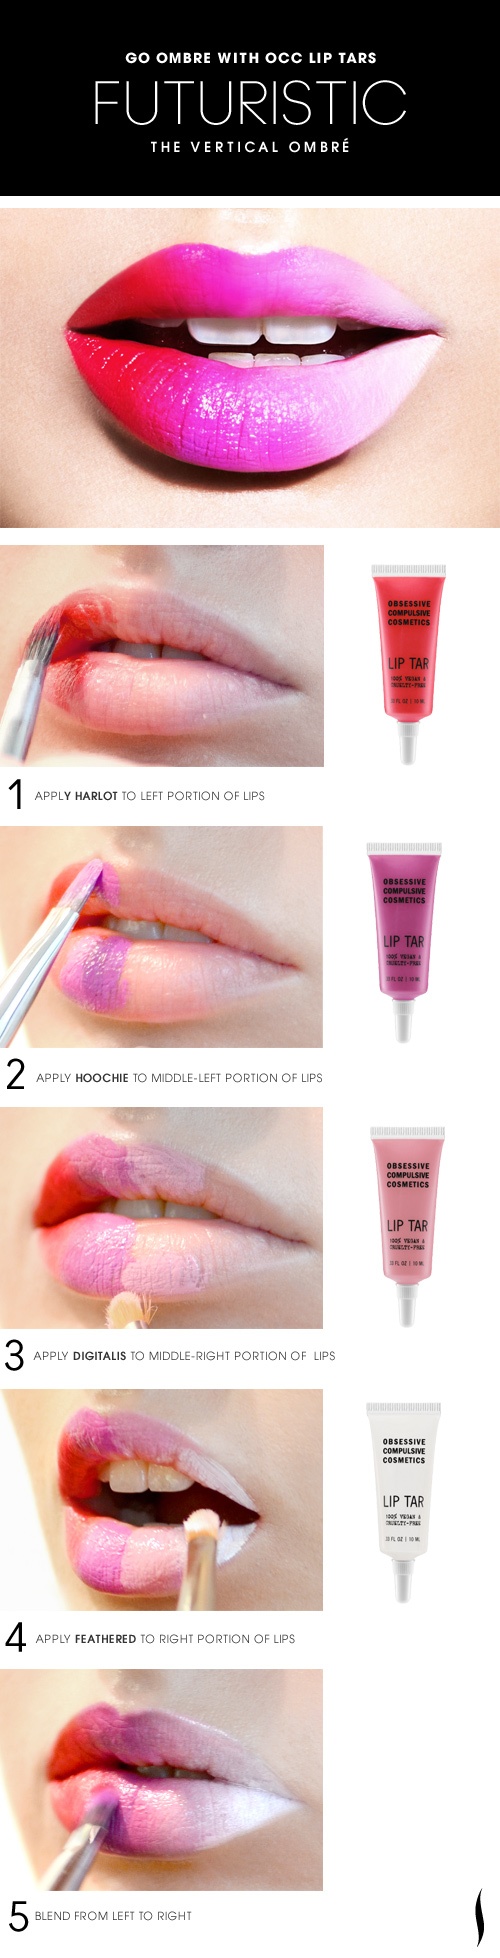 Vertical Ombre Lips